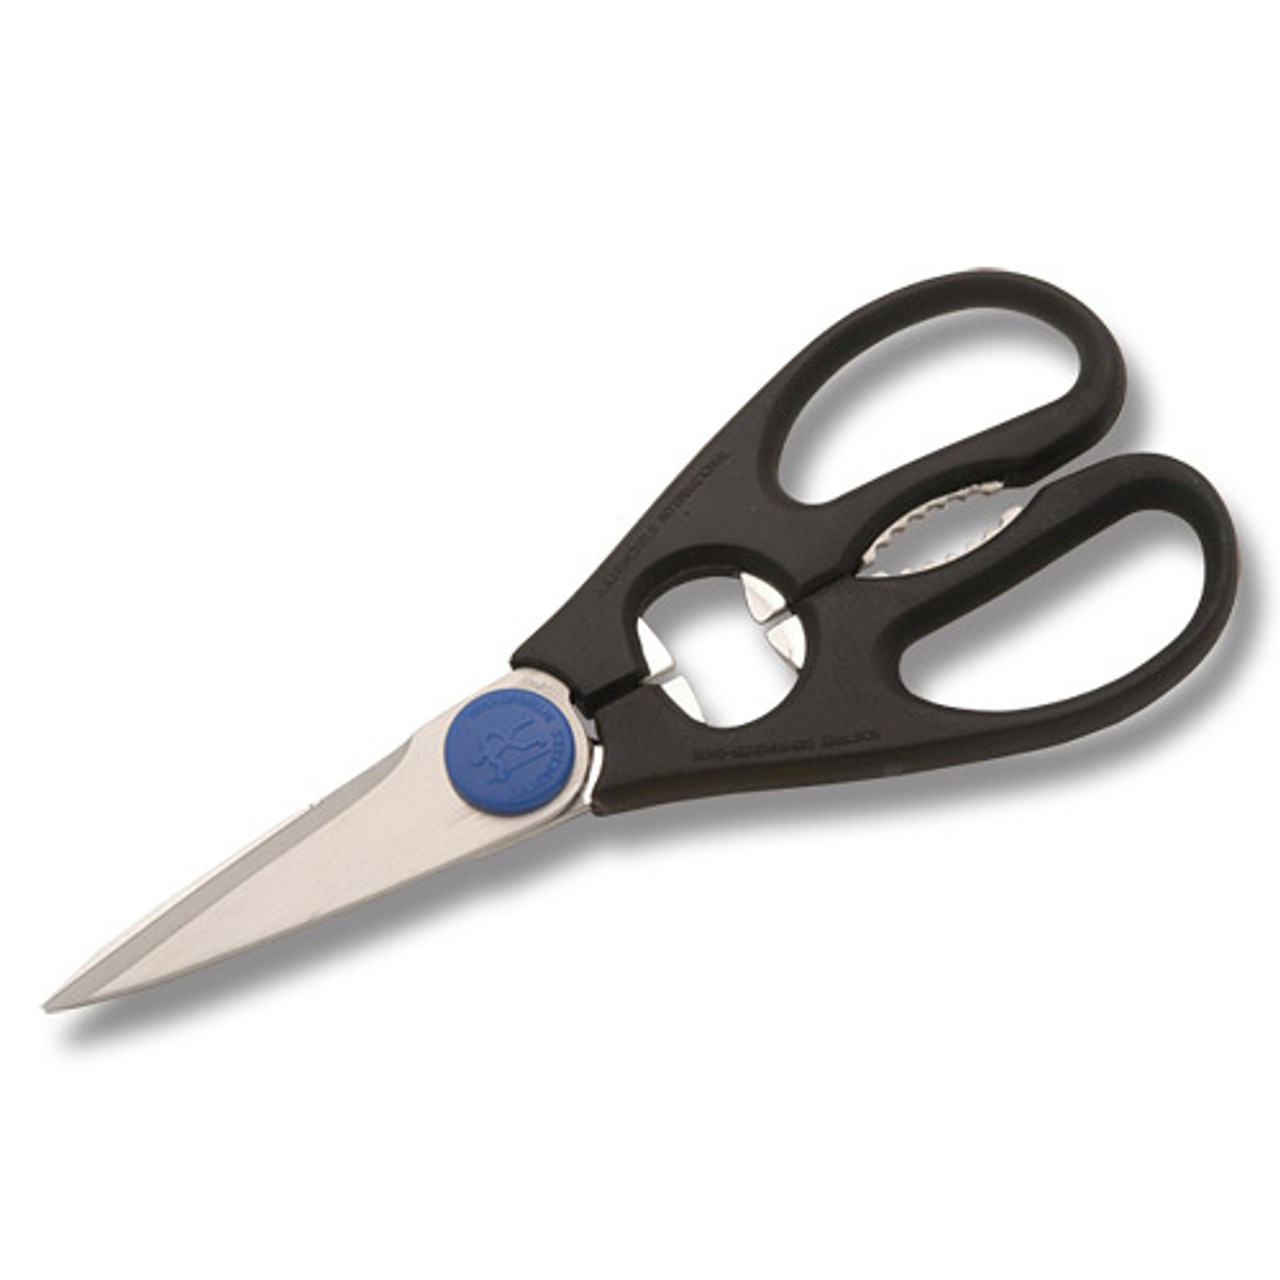 Zwilling J.A. Henckels TWIN® Barber Shears 6 Barber Shears - KnifeCenter -  H43552161 - Discontinued